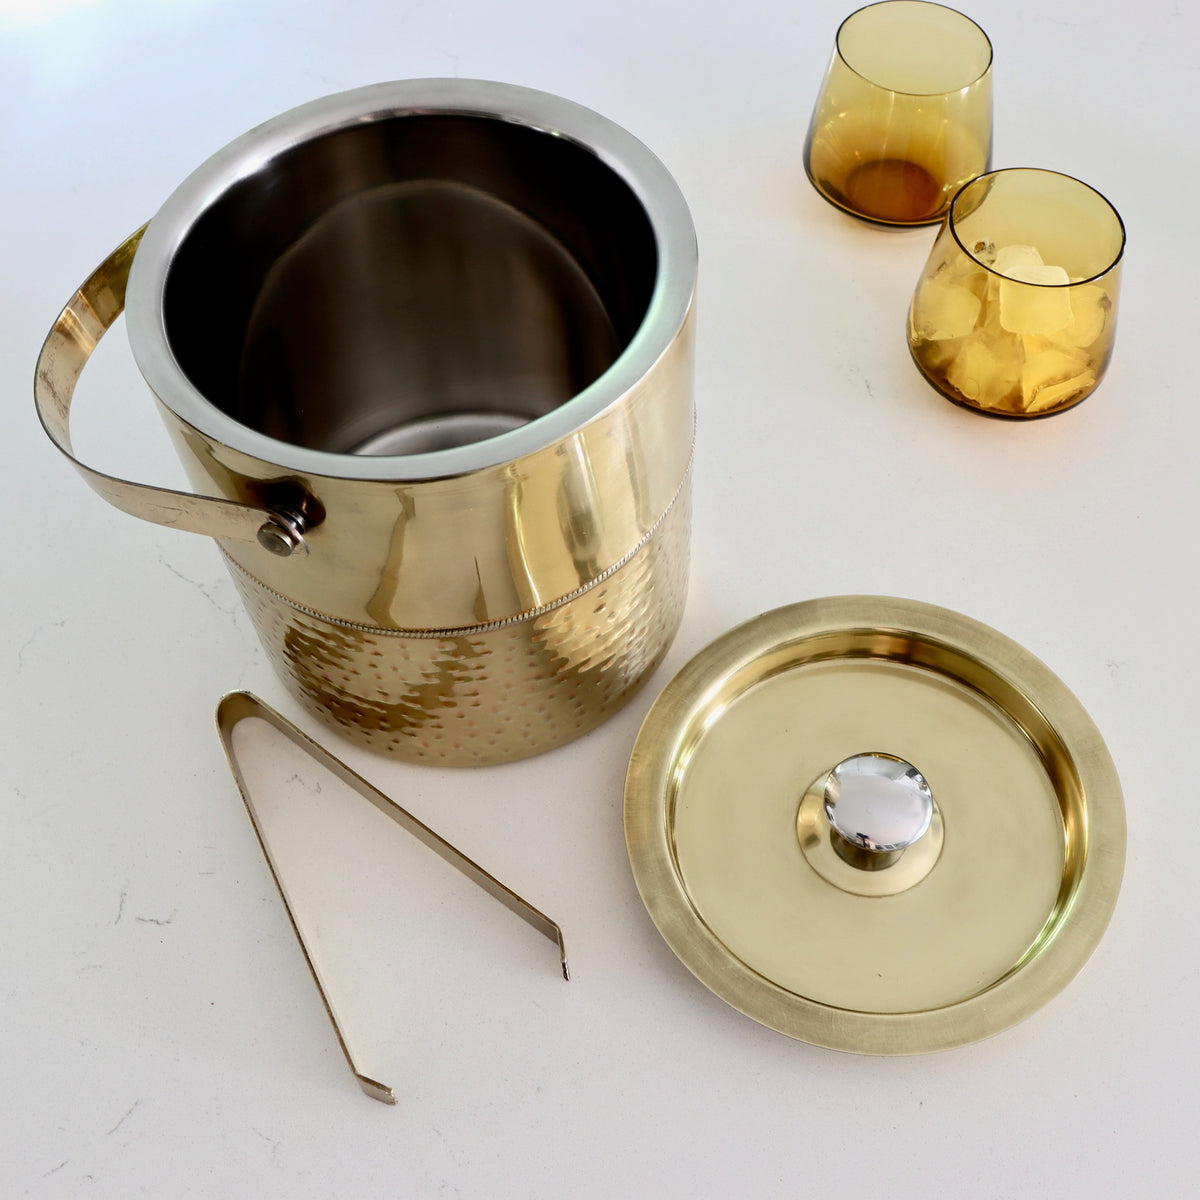 Oro Brass Finished Hammered Stainless Steel Ice Bucket - Holistic Habitat 